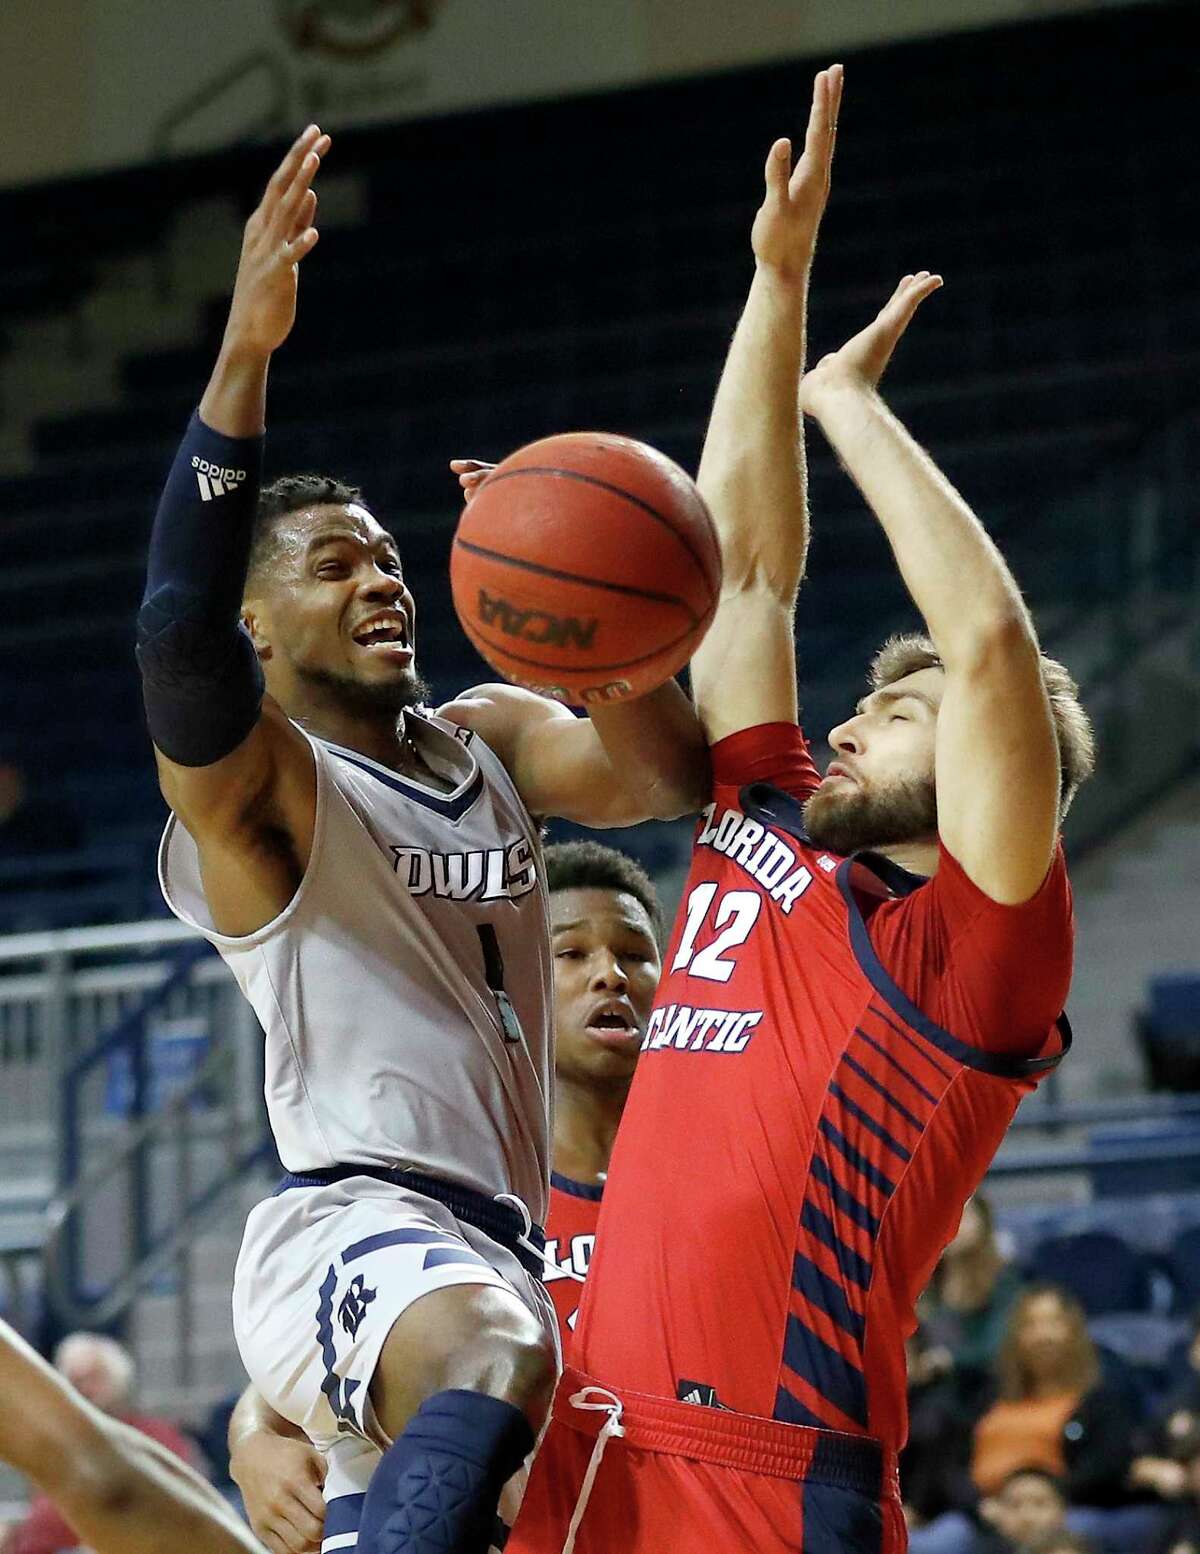 Rice Owls guard Josh Parrish (1) goes up for a basket against Florida Atlantic Owls forward Aleksandar Zecevic (12) during the first half of an NCAA men's college basketball game at Tudor Fieldhouse Thursday, Jan. 9, 2020, in Houston.